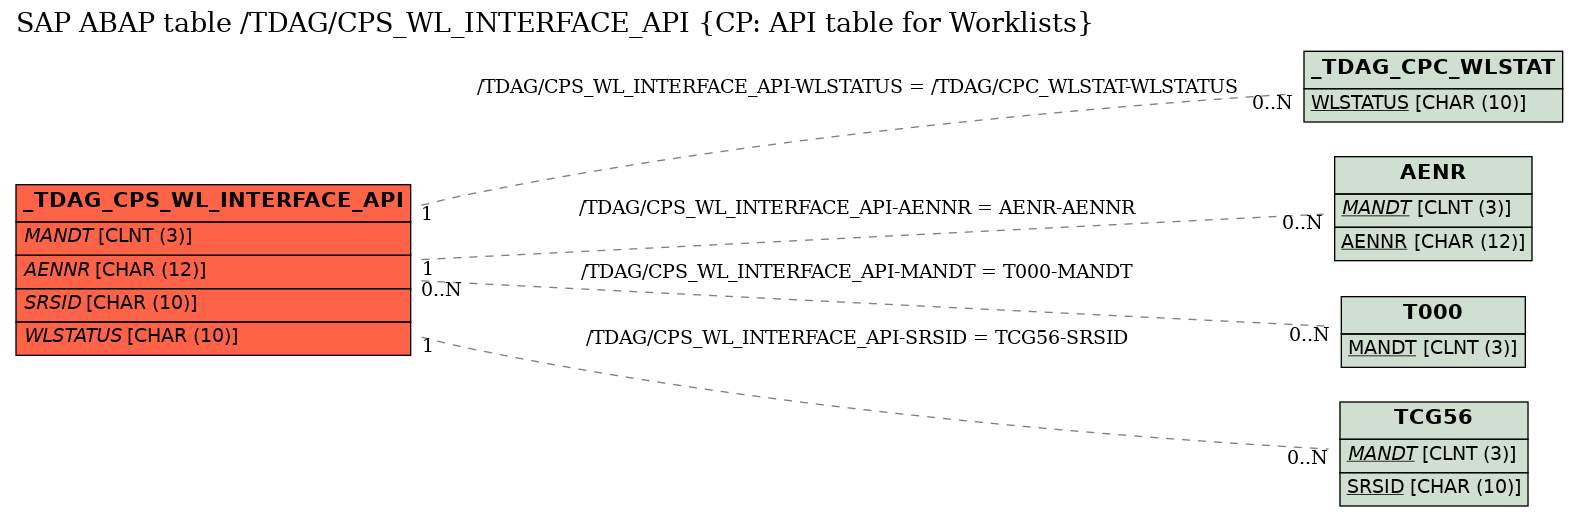 E-R Diagram for table /TDAG/CPS_WL_INTERFACE_API (CP: API table for Worklists)